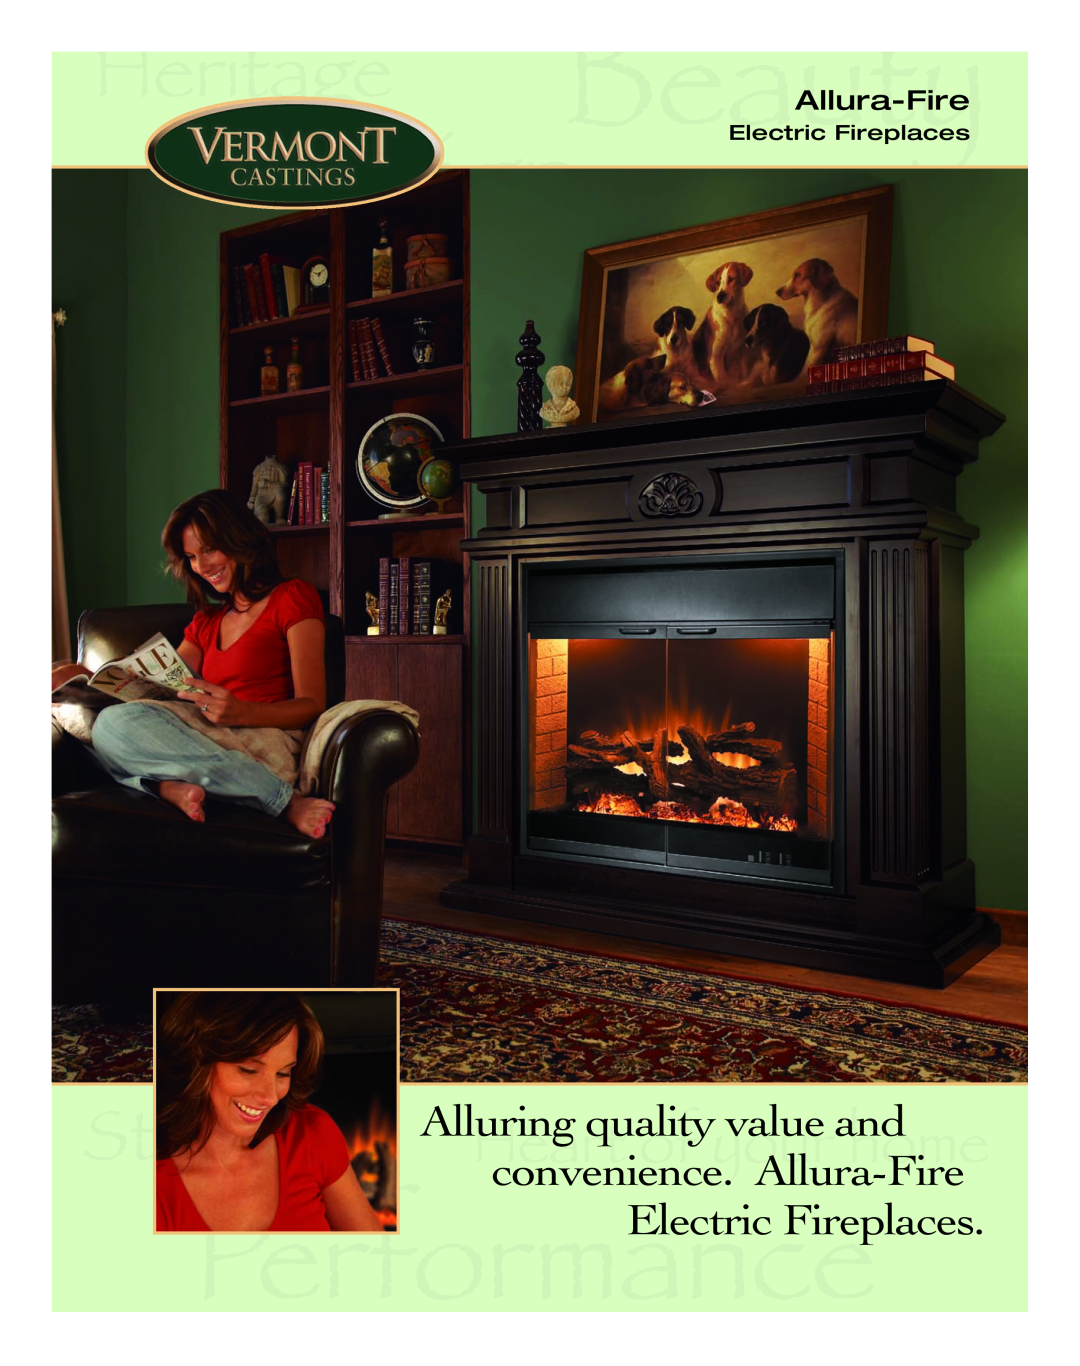 Vermont Casting EF33, EF26, EF36 manual Alluring quality value and, convenience.Allura-Fire, Electric Fireplaces 